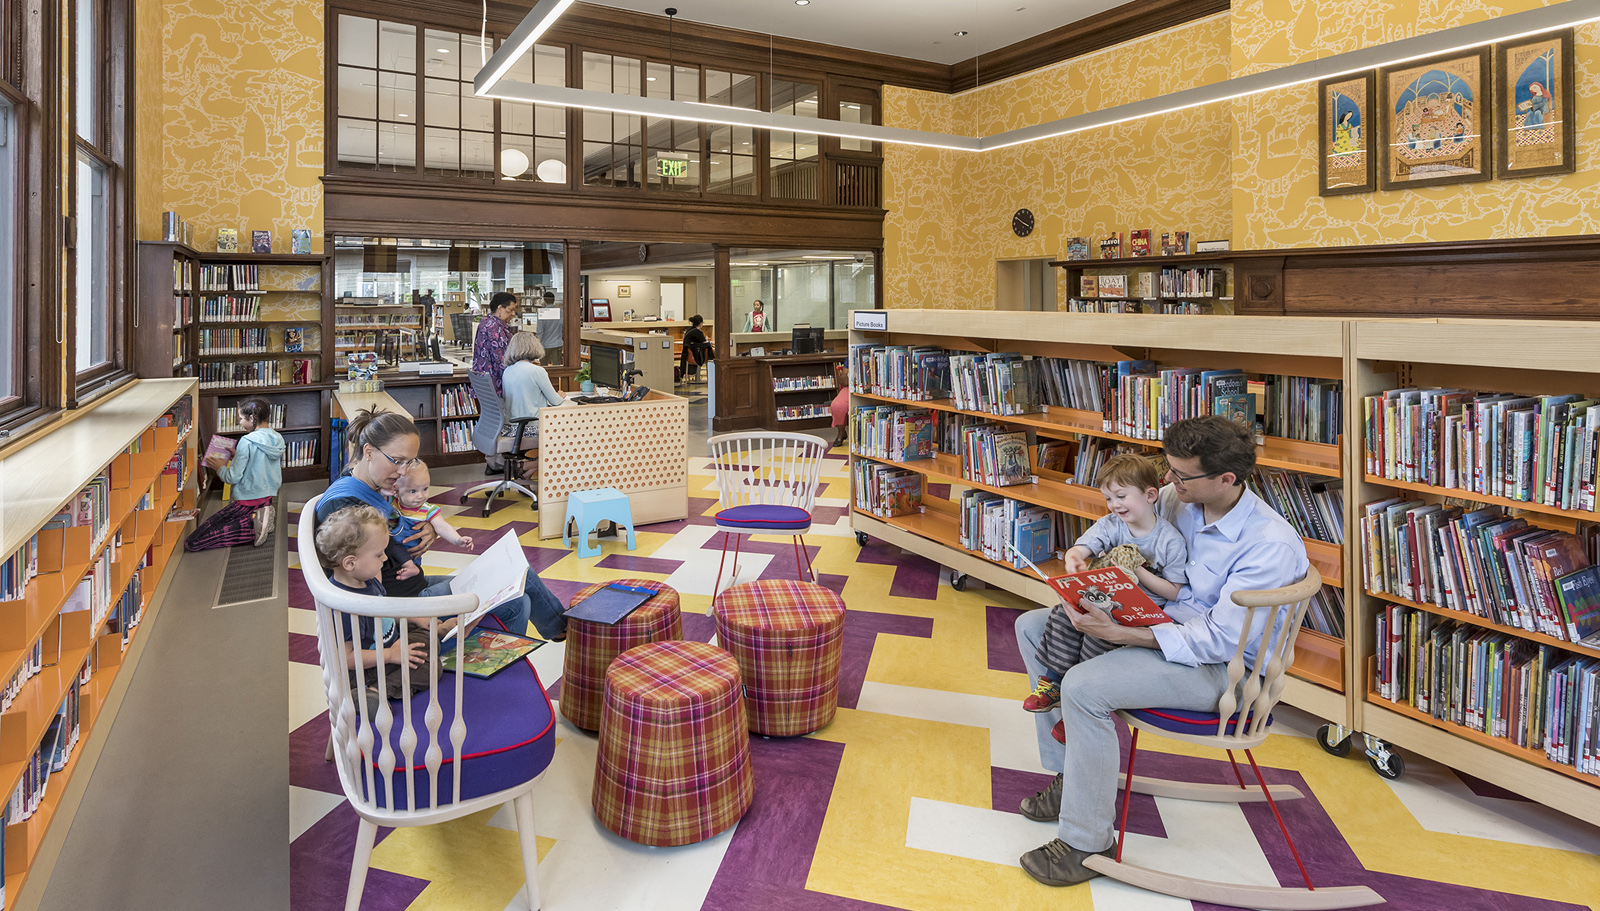 An image of the Boston Public library Jamaica Plain branch Children's reading room